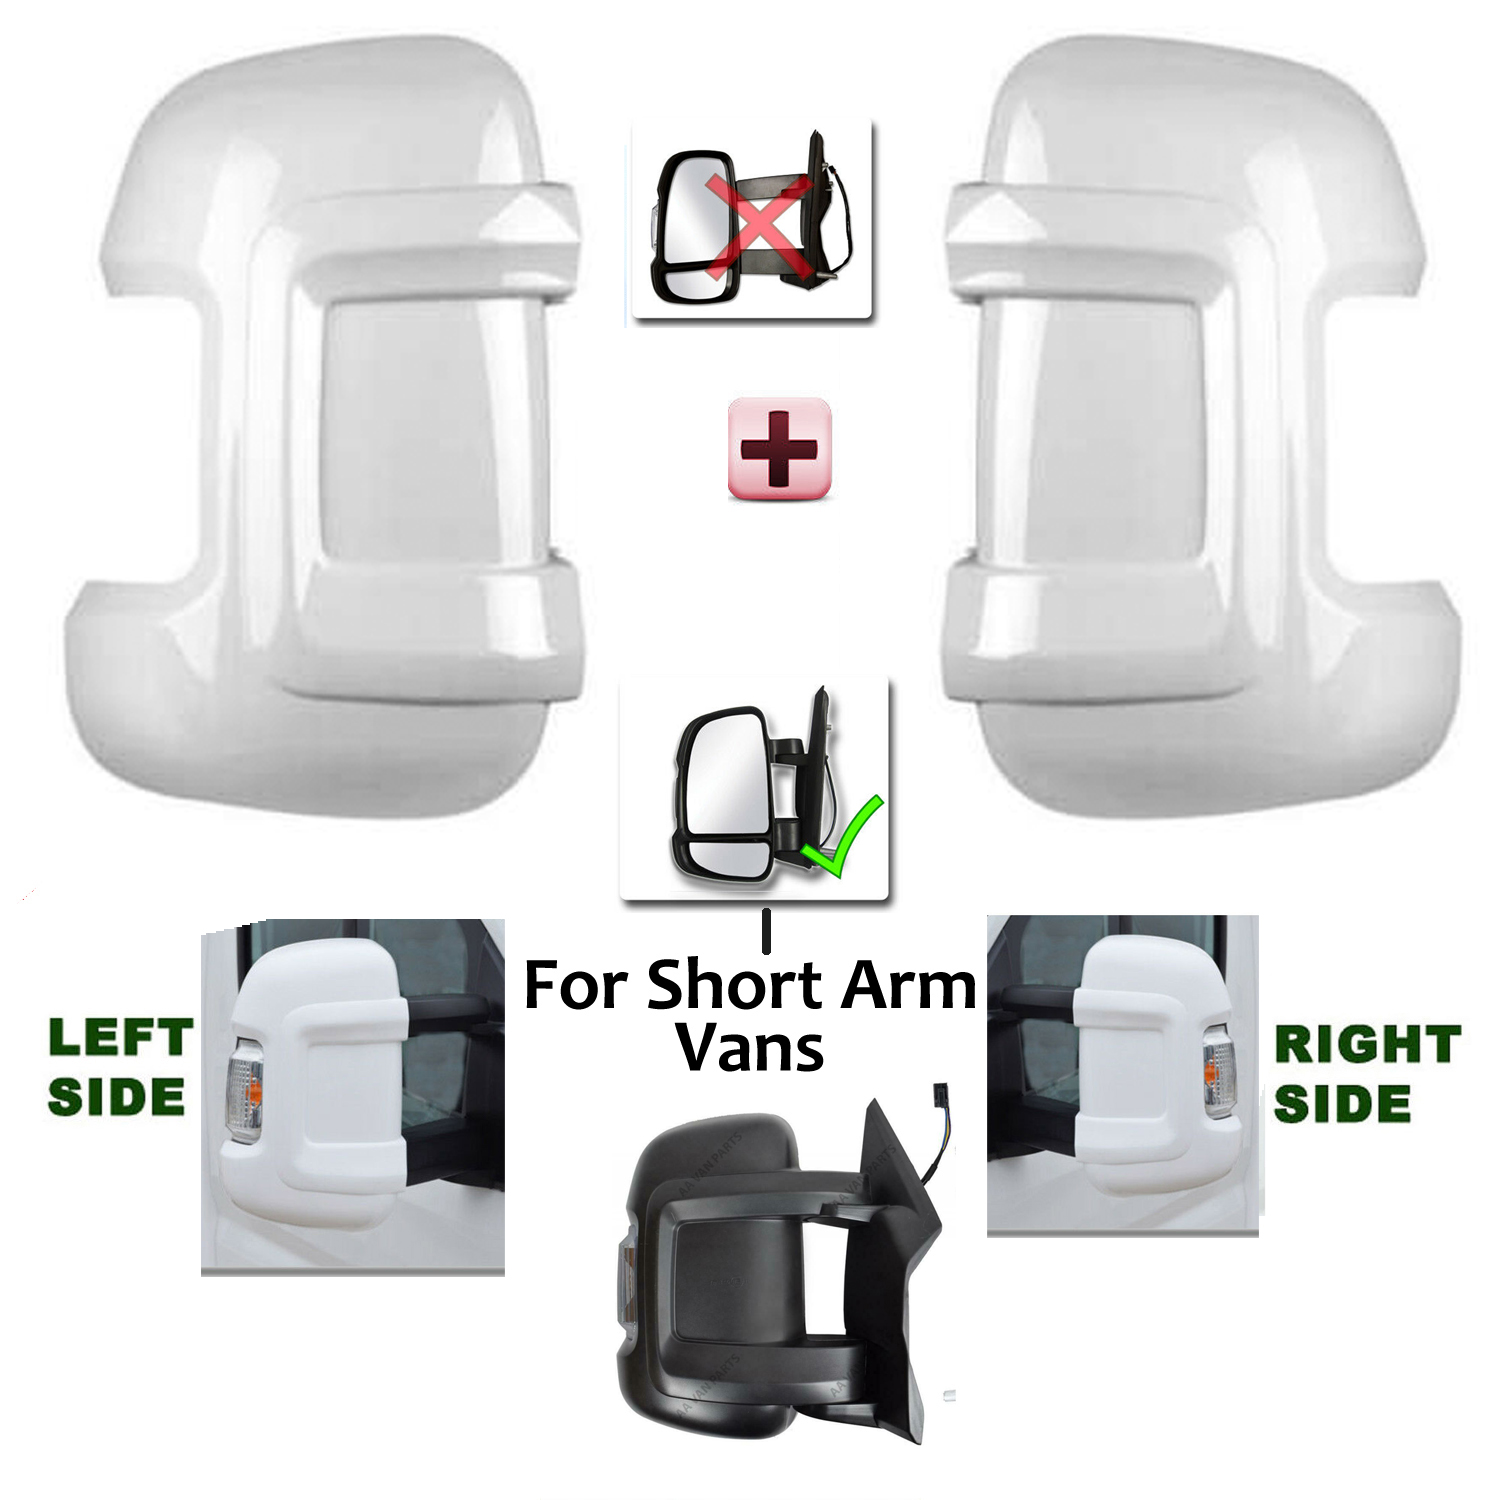 Citroen  Jumpy Wing Mirror Cover Protectors LEFT and RIGHT (PAIR ) 2006 to 2021 – Gloss White Wing Mirror Cover Protector With Arms ( LONG Arm Vans )